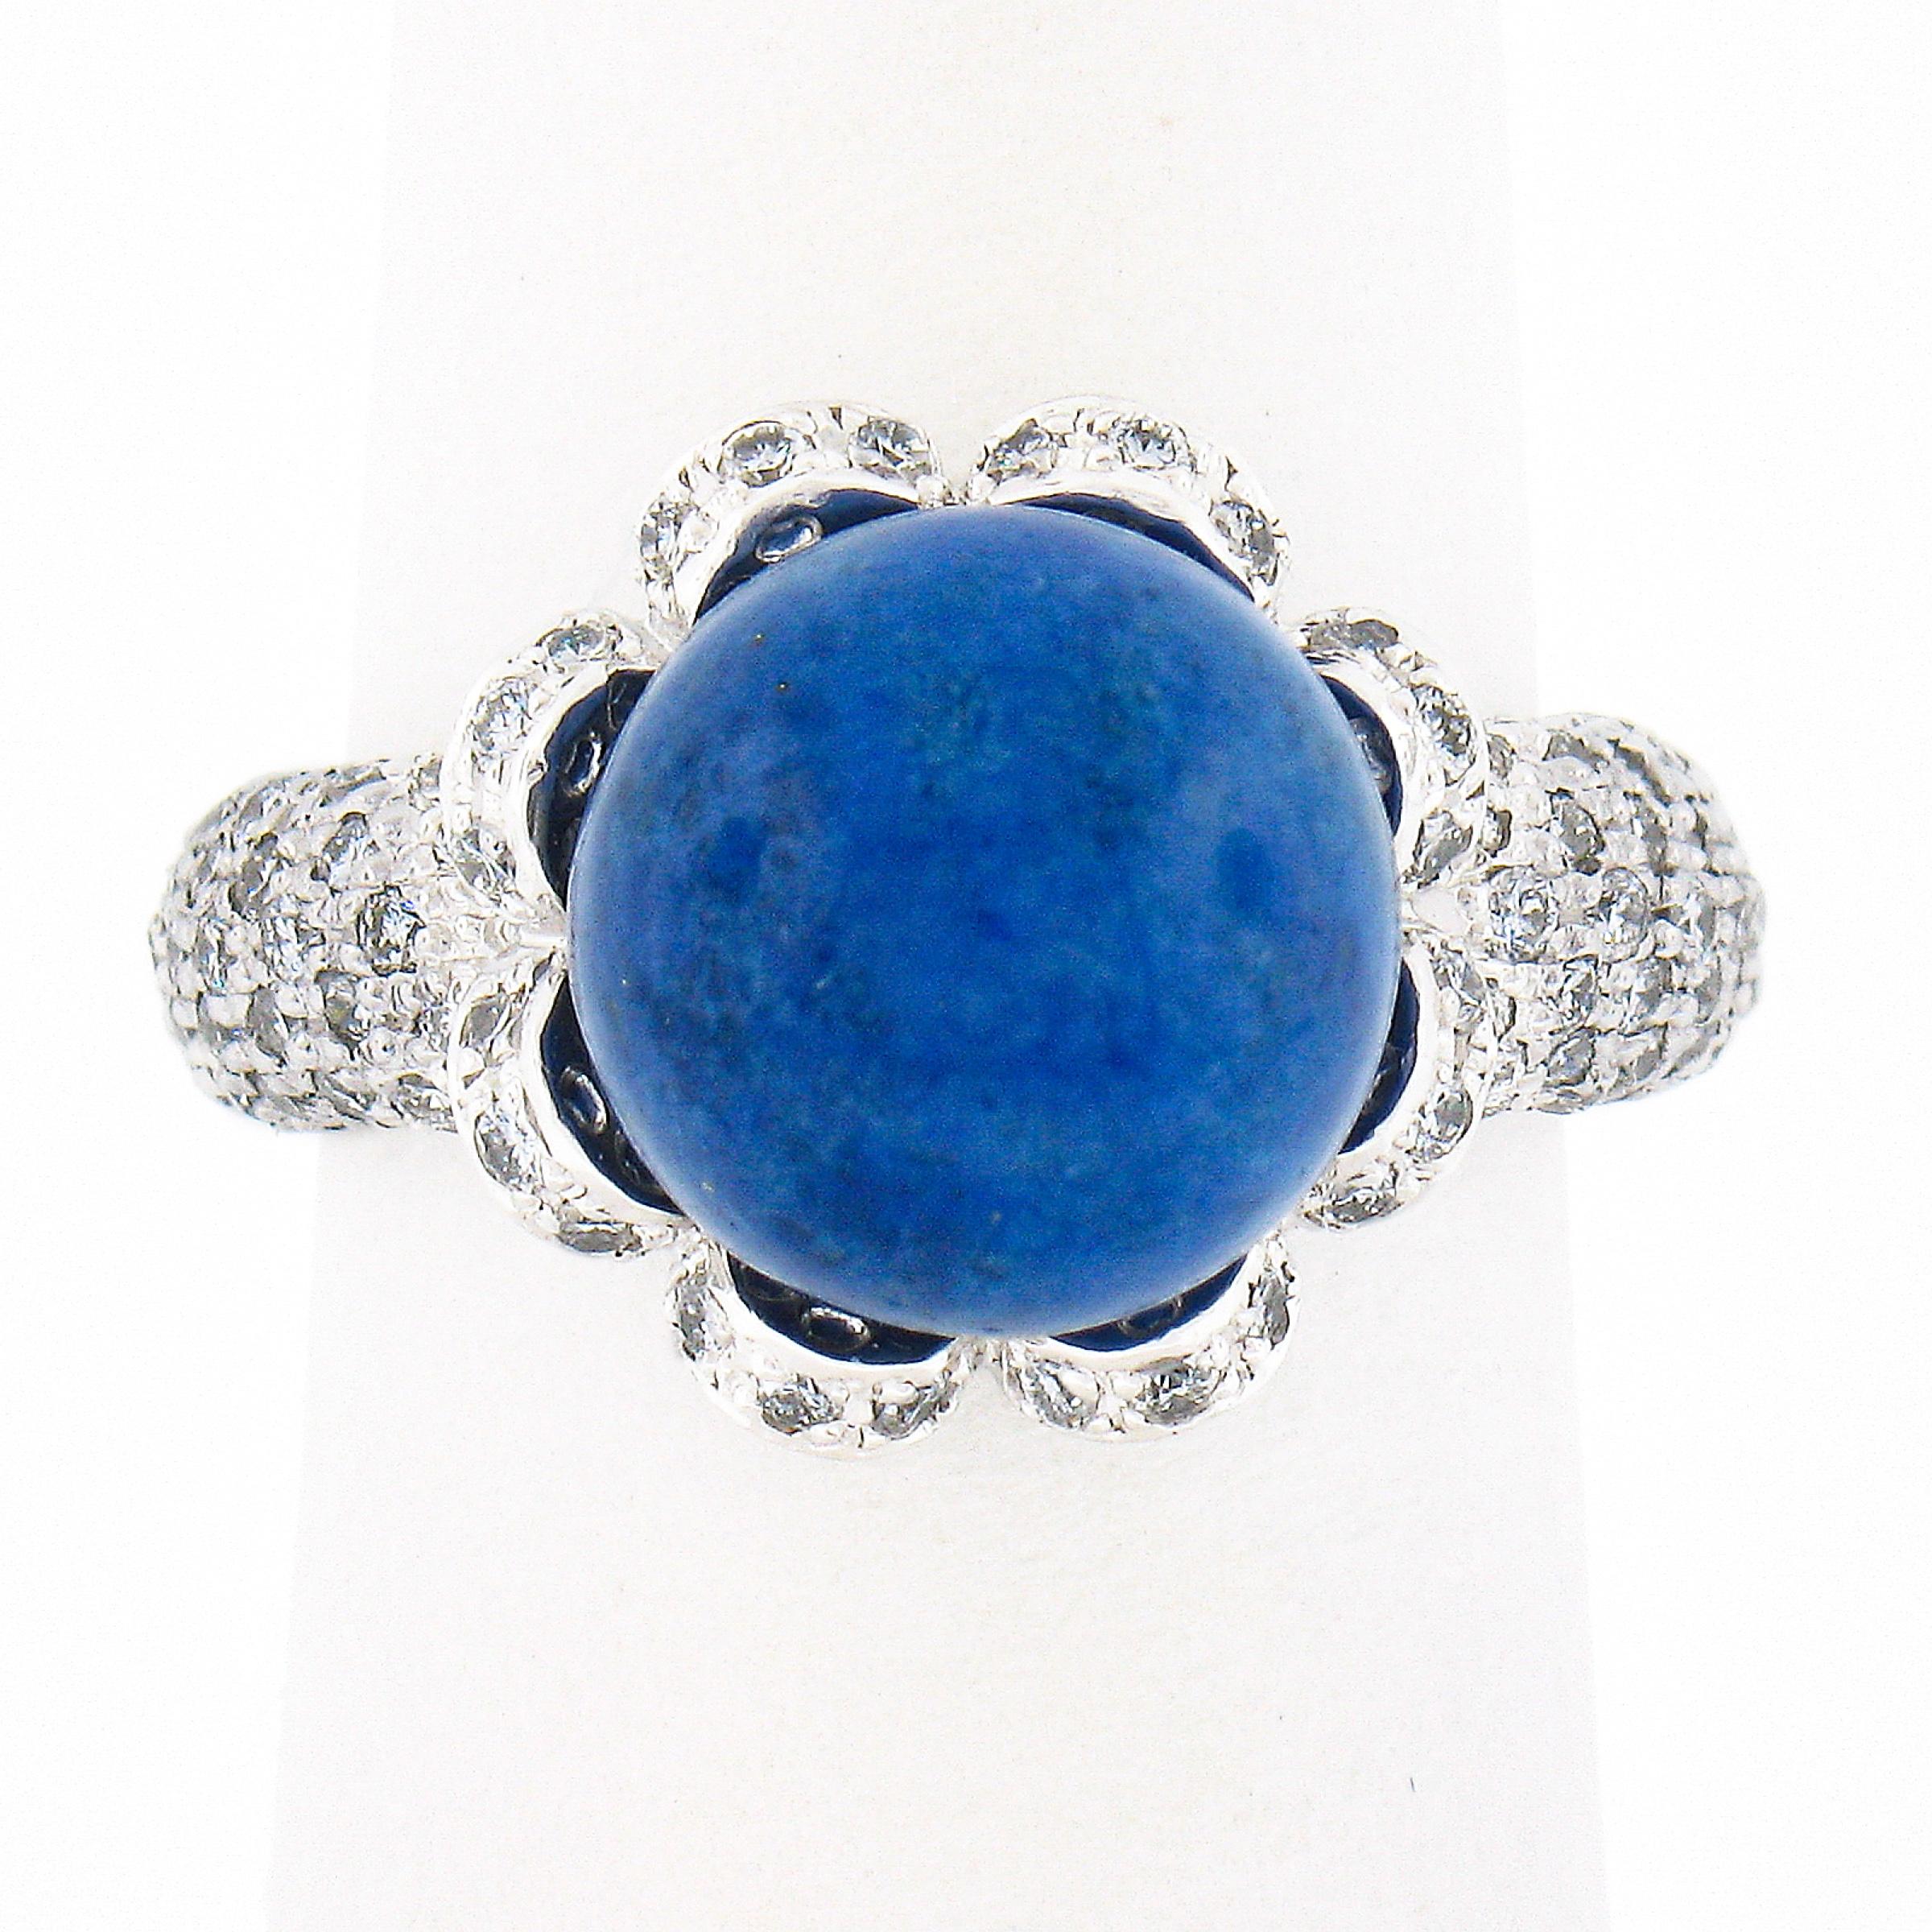 Here we have an absolutely magnificent and uniquely designed cocktail ring that is crafted from solid platinum. It features a gorgeous, 10.3mm, natural lapis stone neatly set at its center in the lovey flower shaped basket setting, and further